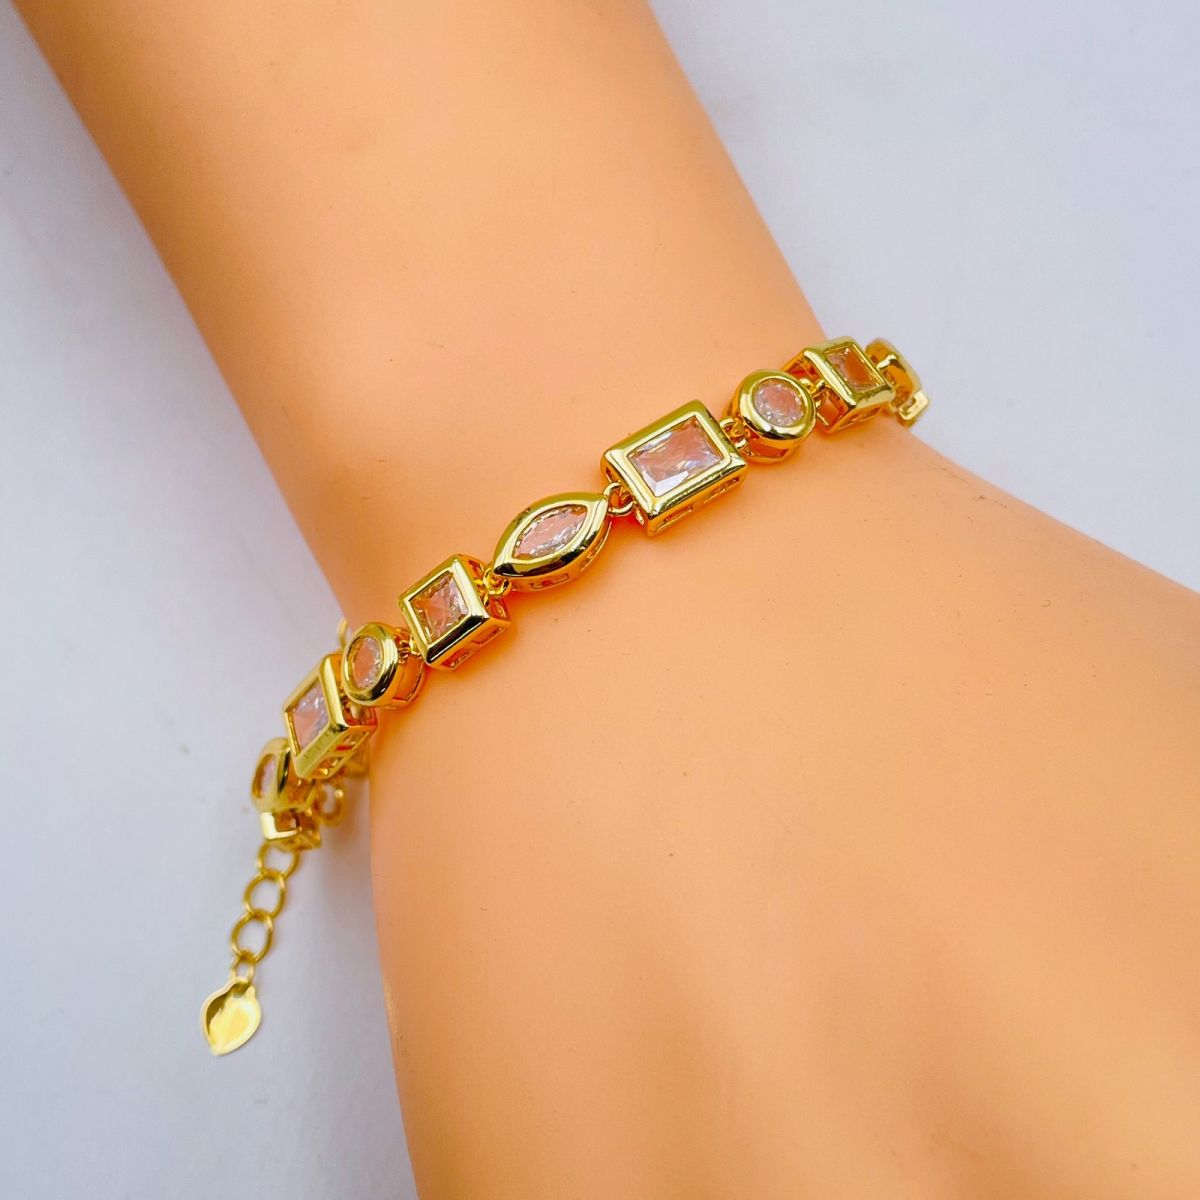 Gold Bracelet for Women with Crystals - Suitable for all occasions - Riwaaz  Crystal and Gold Bracelet by Blingvine